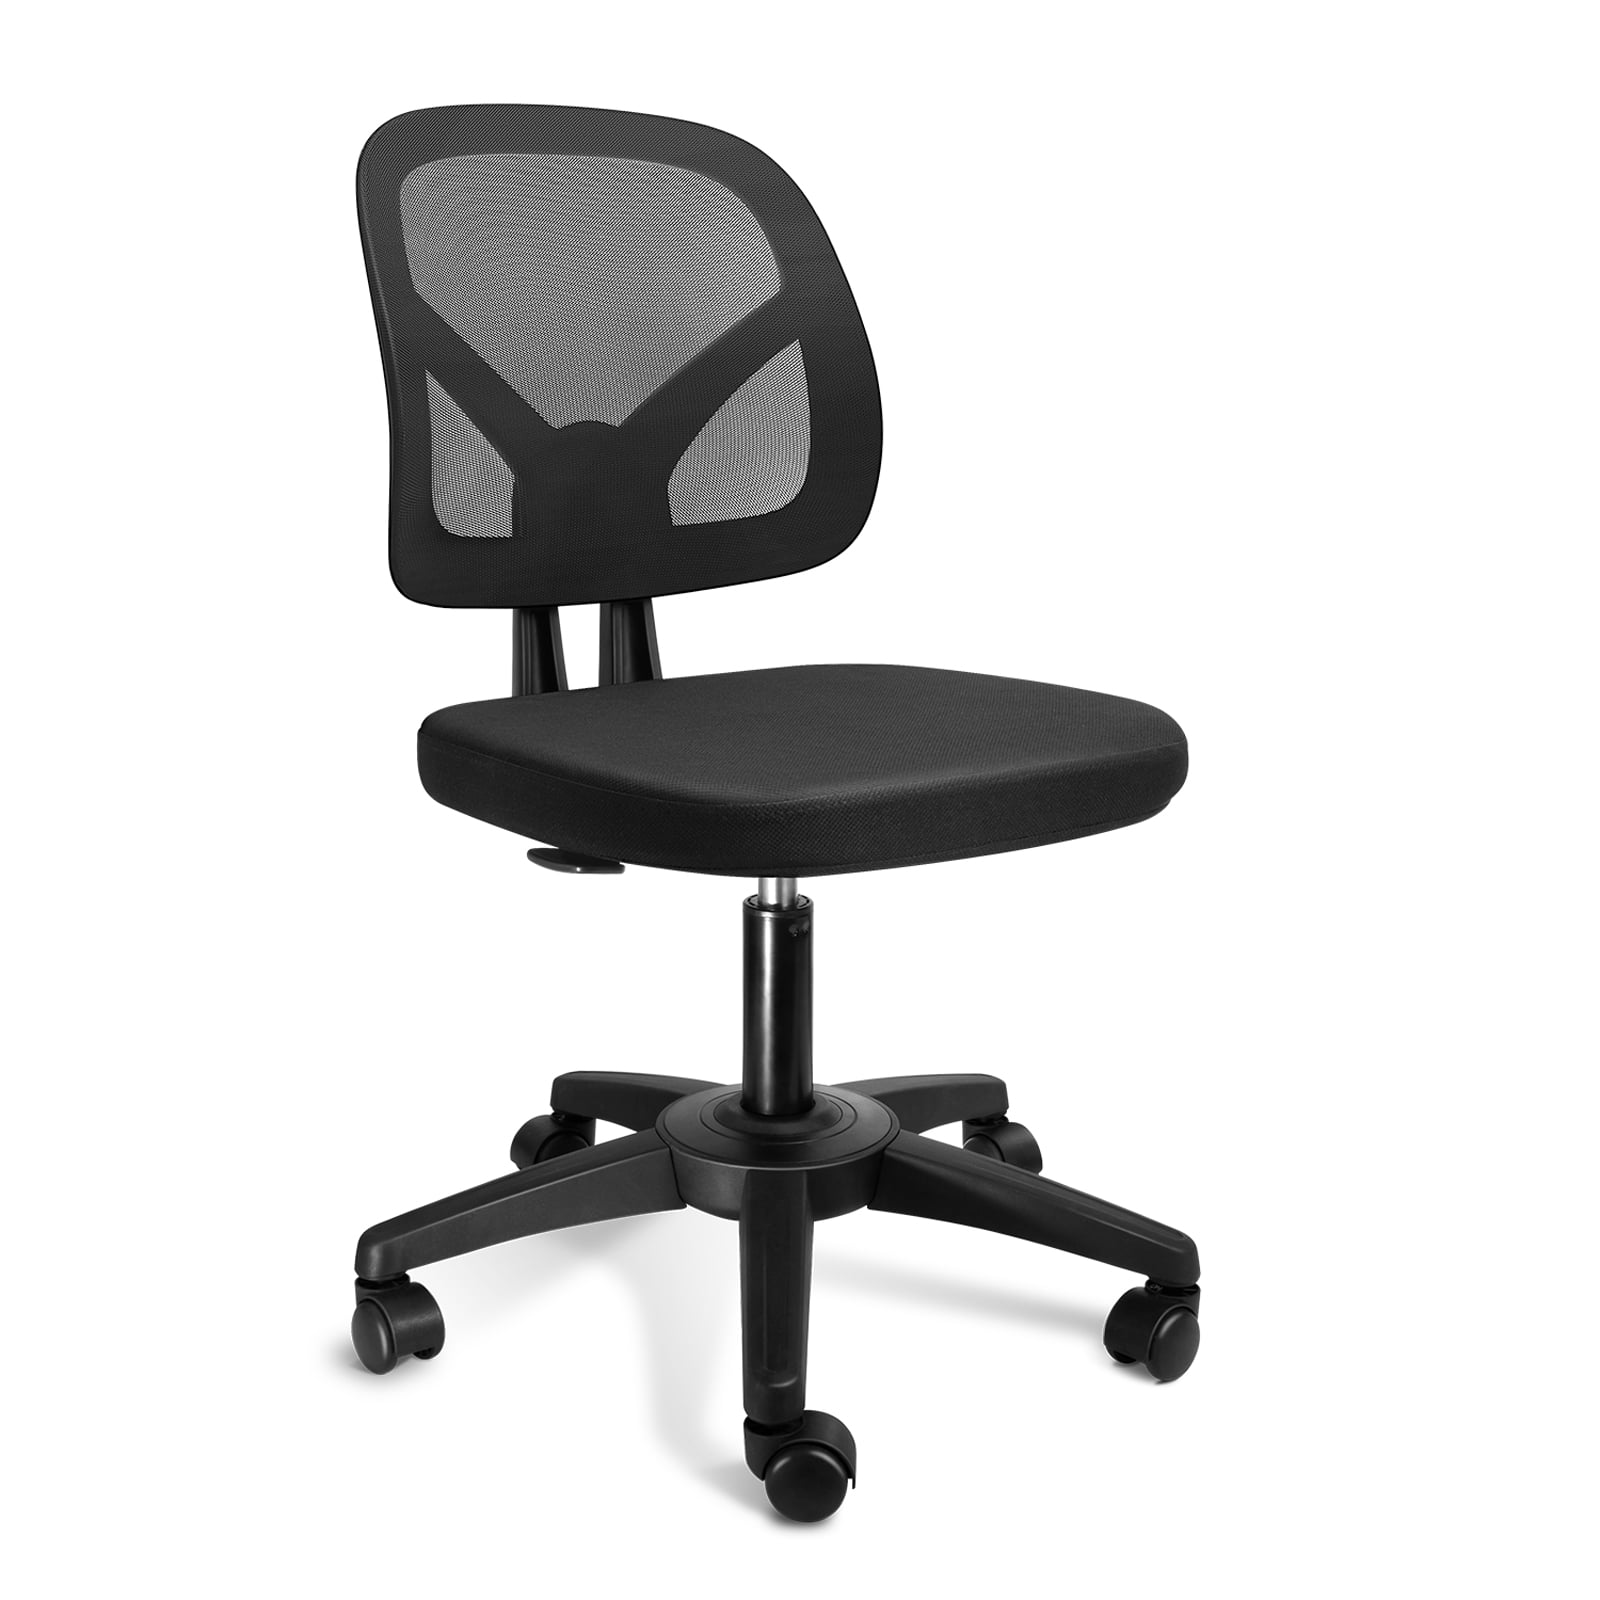 Armless Mesh Office Chair, Adjustable Computer Chair No Armrest Mid